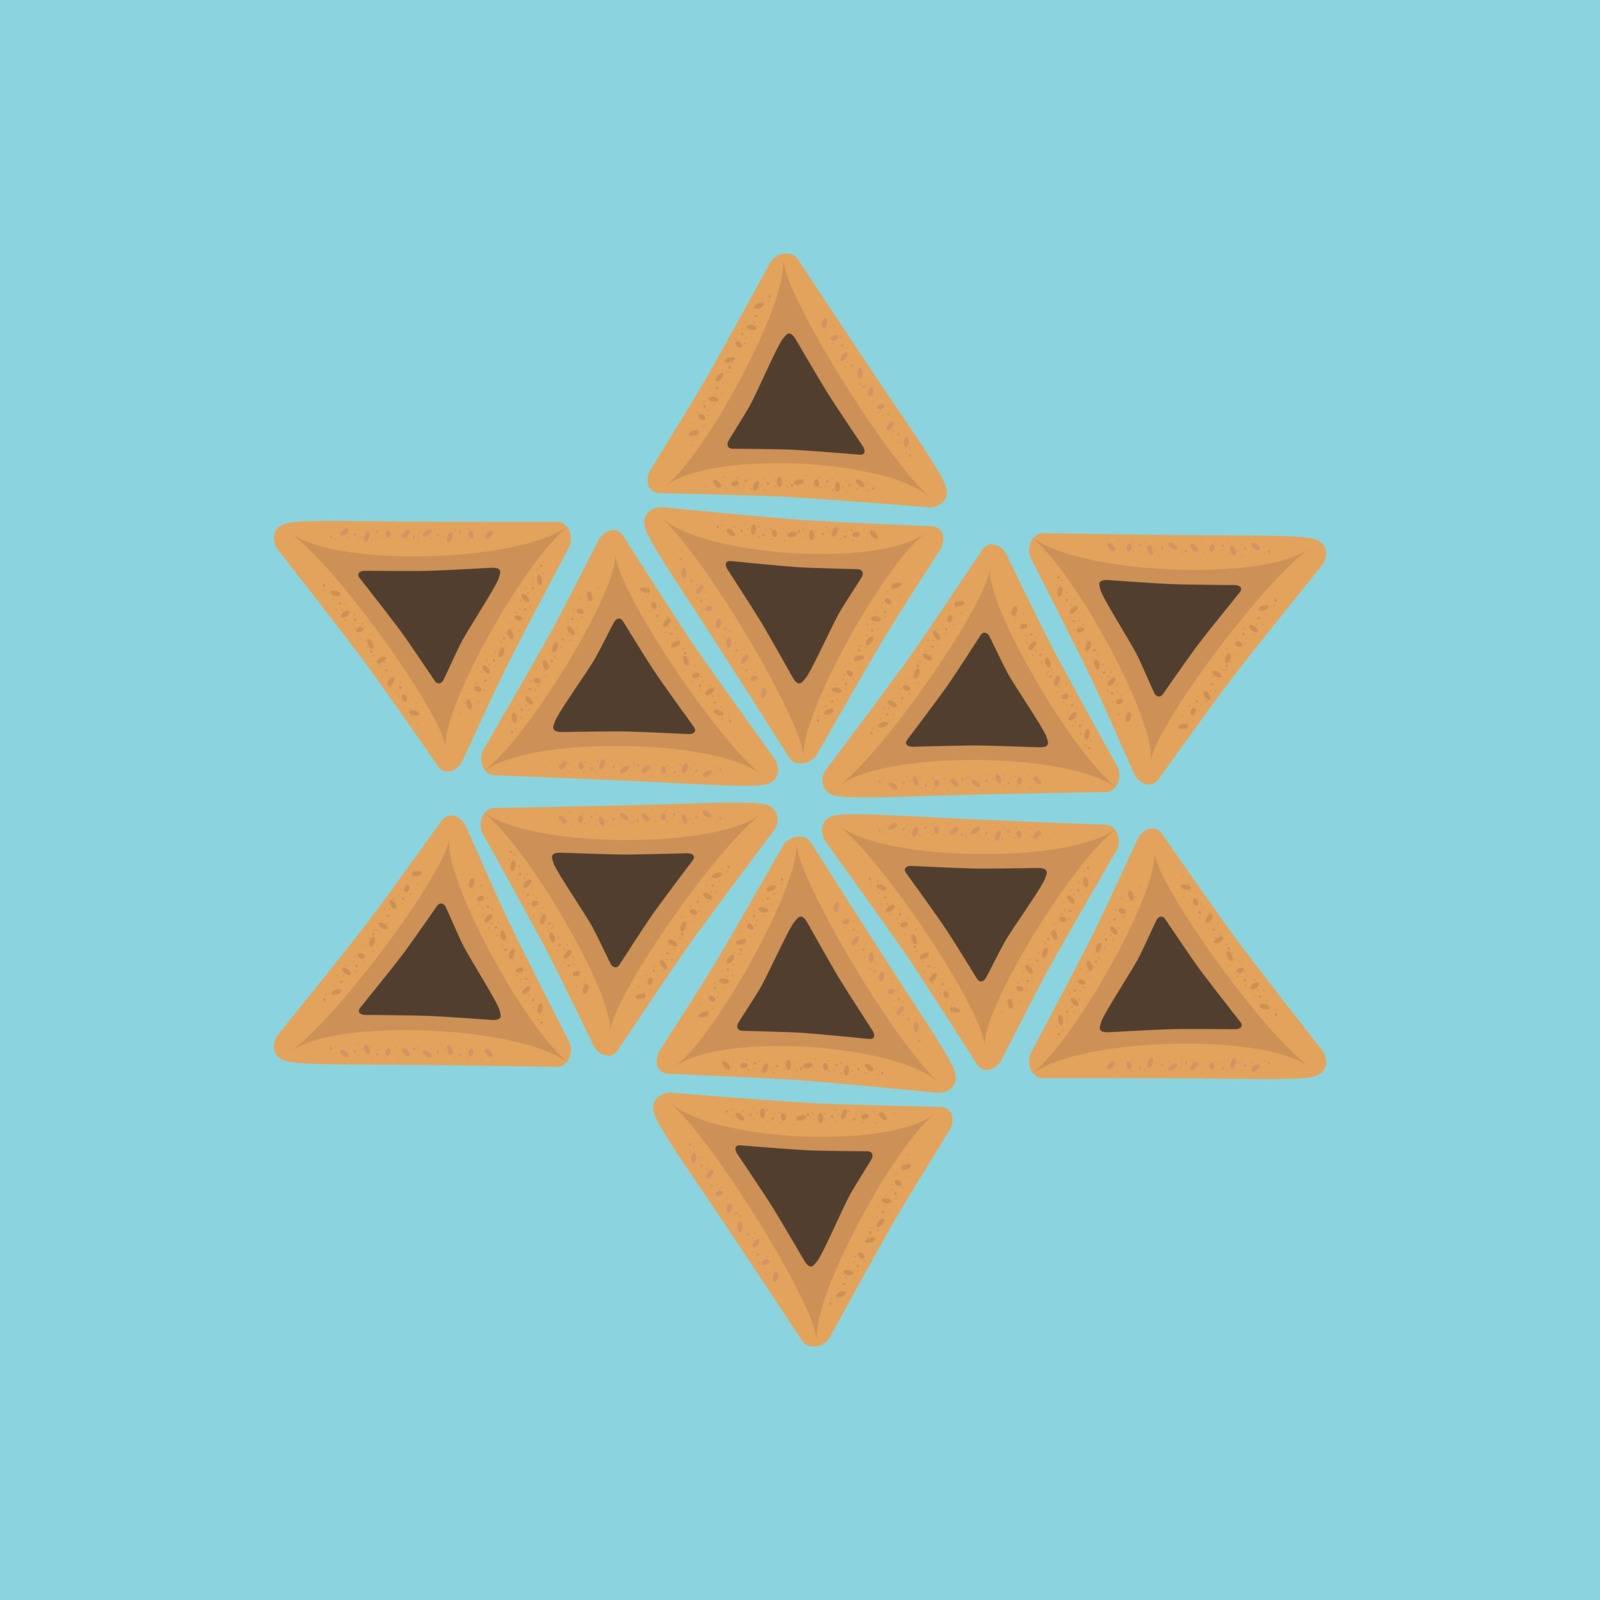 Purim holiday flat design icons of hamantashs in star of david shape with blue background. Vector eps10 illustration.